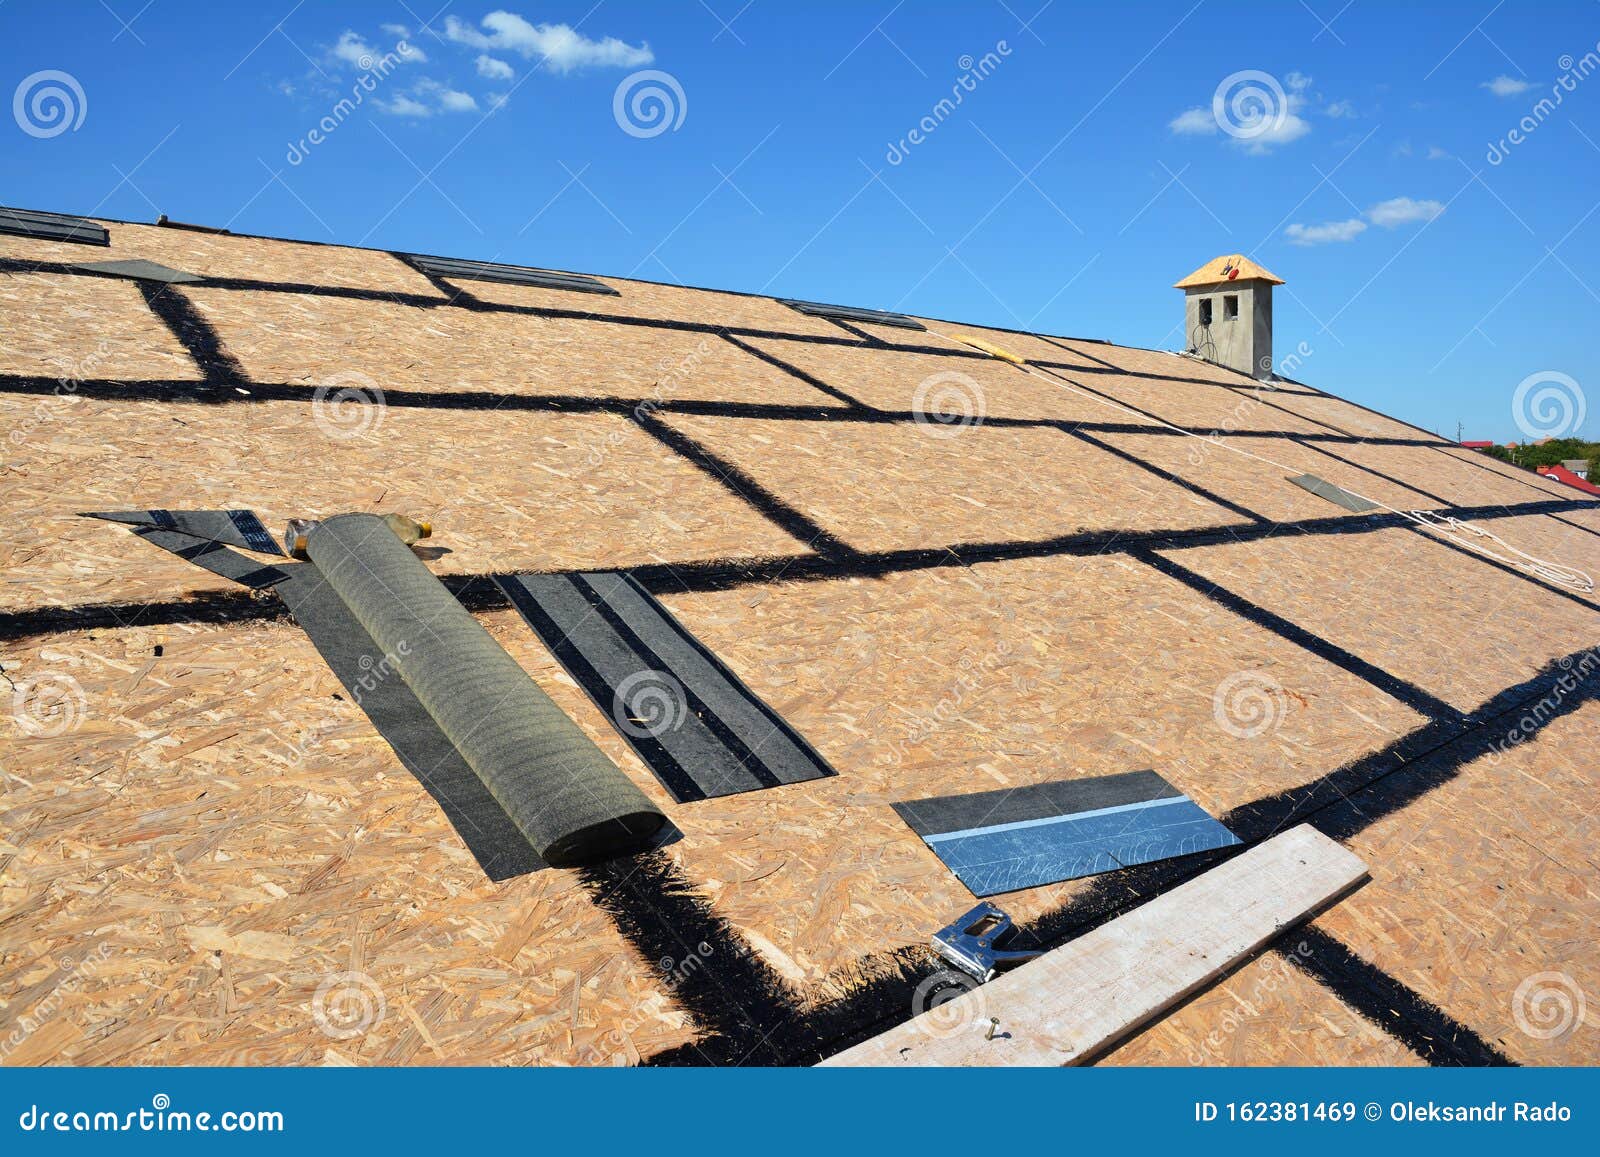 Waterproofing Roof Services South Florida - Allied Roofing